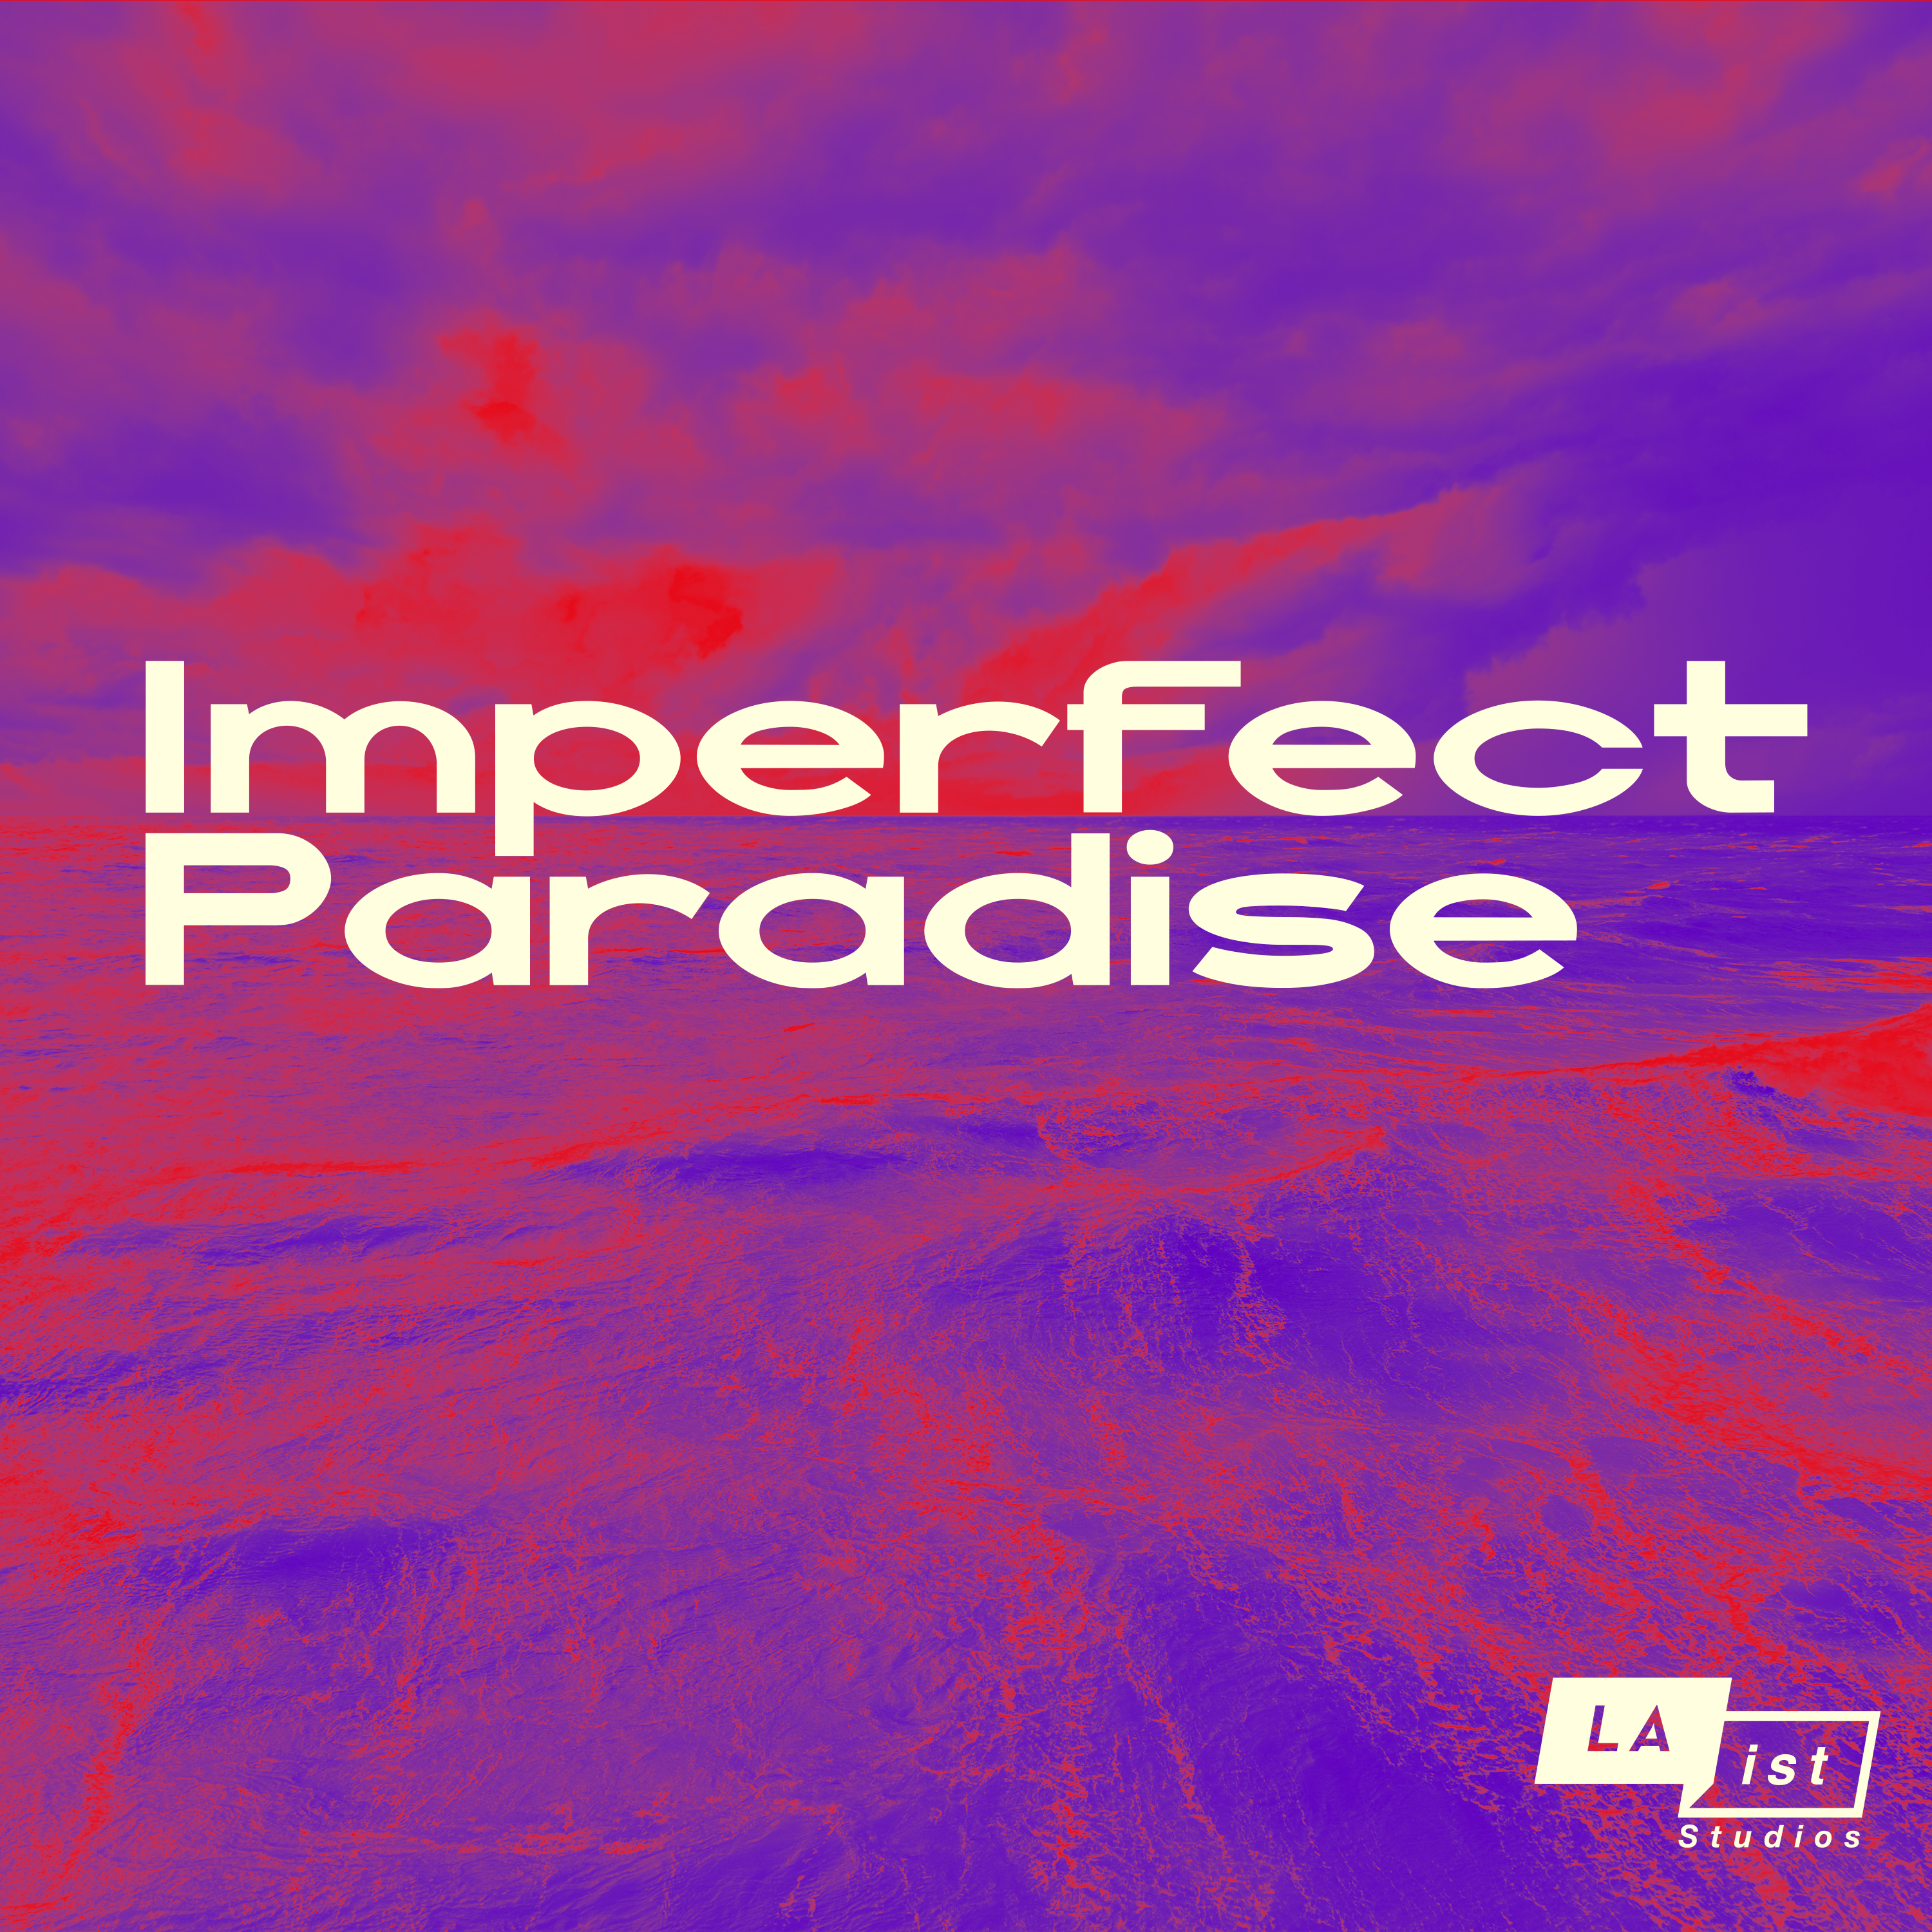 Imperfect Paradise: Strippers Union from LAist